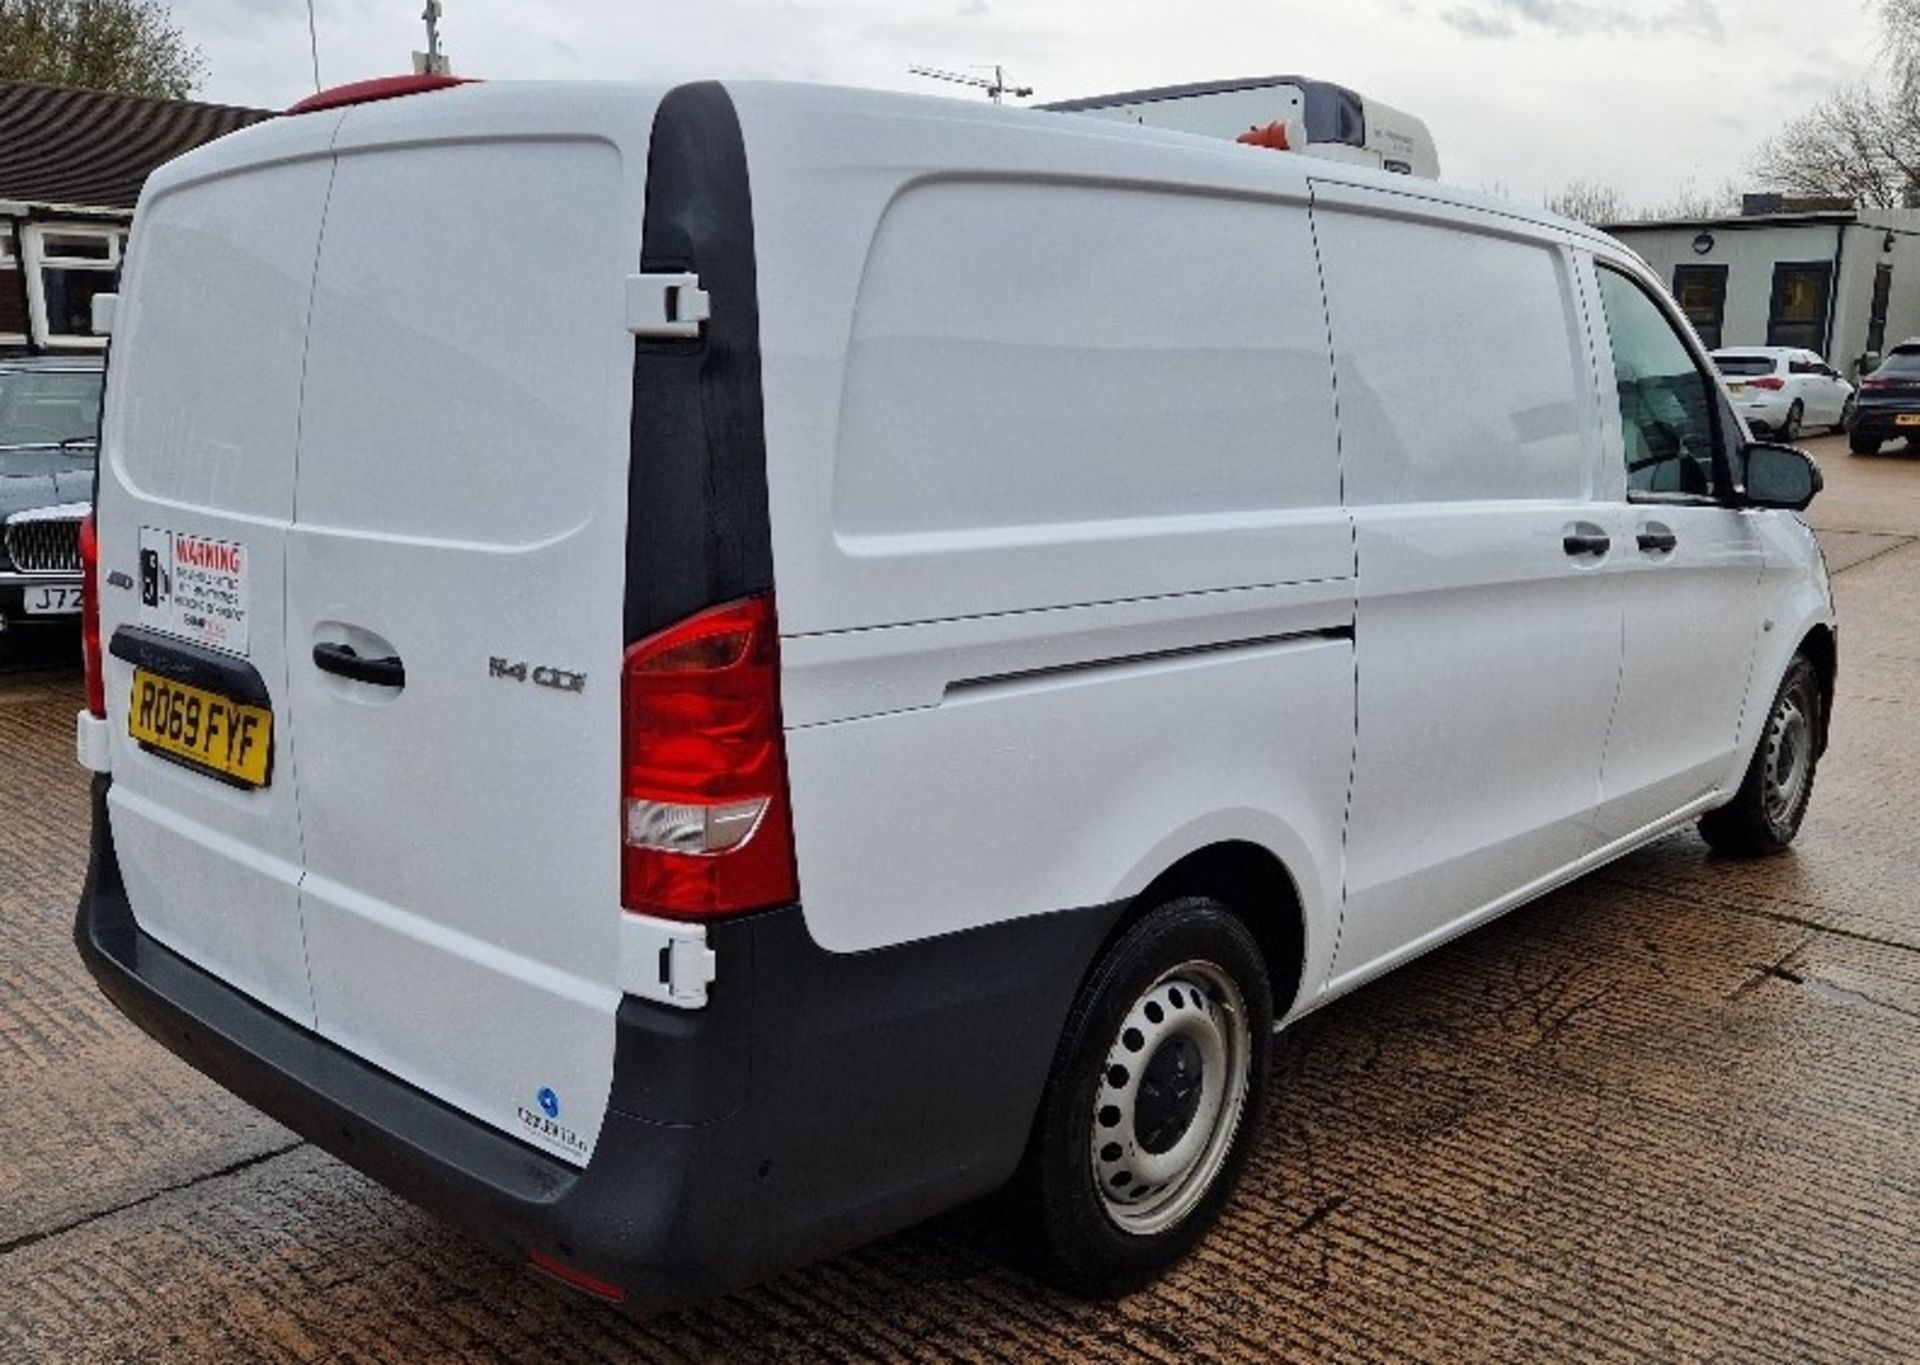 WHITE MERCEDES-BENZ VITO 114 PURE CDI DIESEL PANEL VAN 2143CC FIRST REGISTERED 11/12/2019 REG: - Image 3 of 10